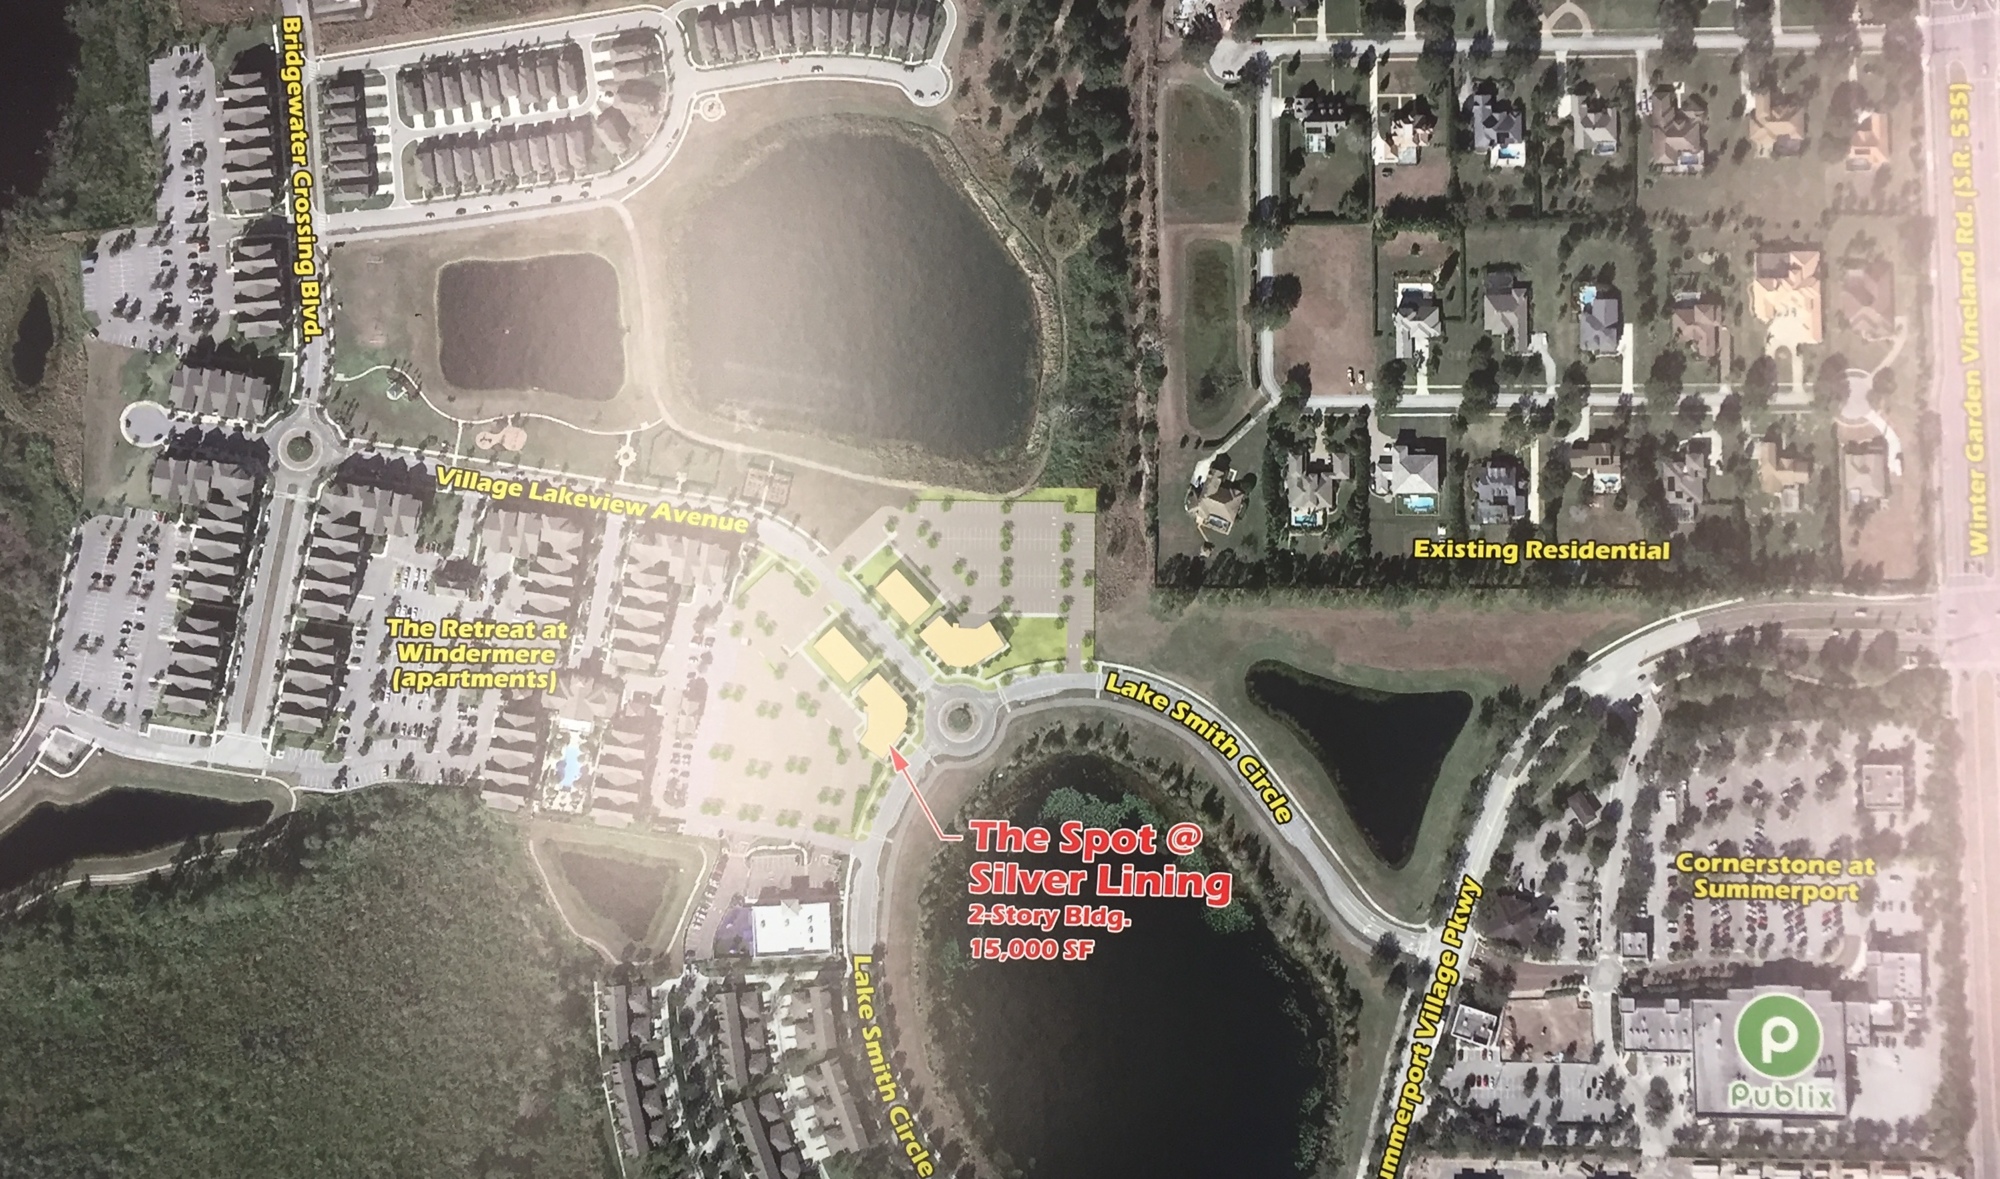 The proposed development is at the corner of Lake Smith Circle and Village Lake Ave.